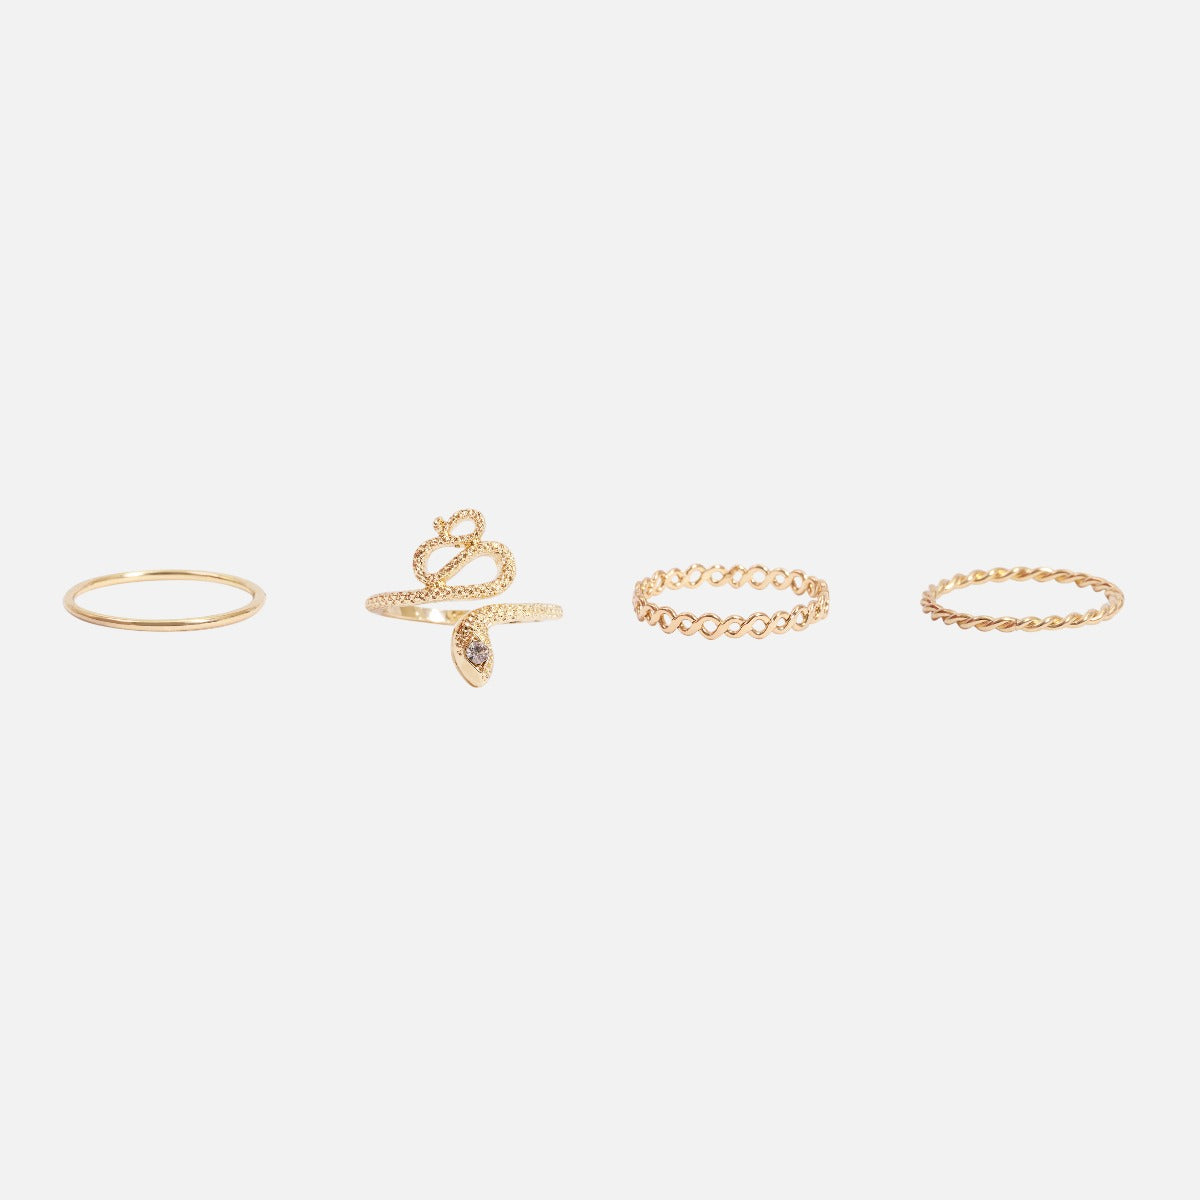 Four golden rings set with snake